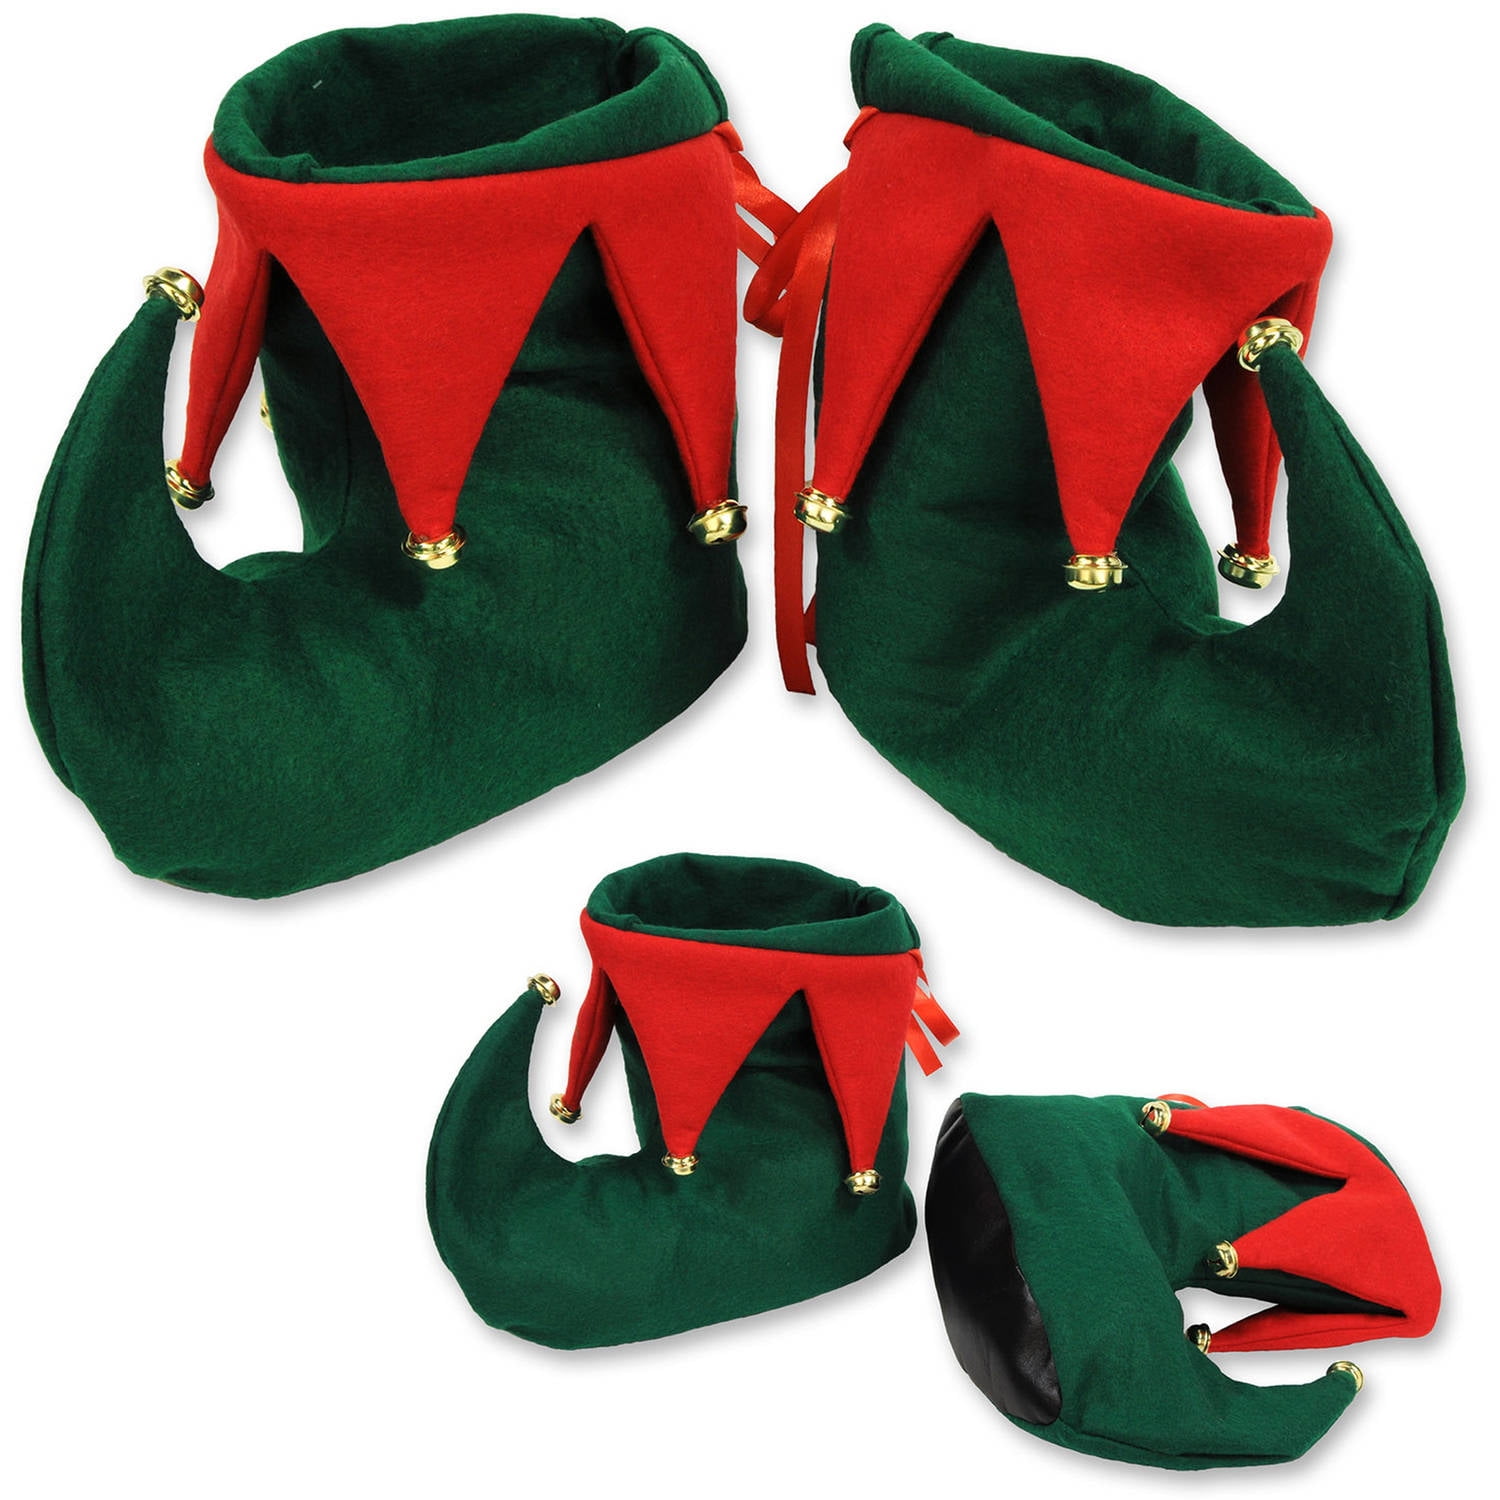 New Deluxe Adults Unisex Santa Helper Elf Shoes Red and Green Christmas Shoes 